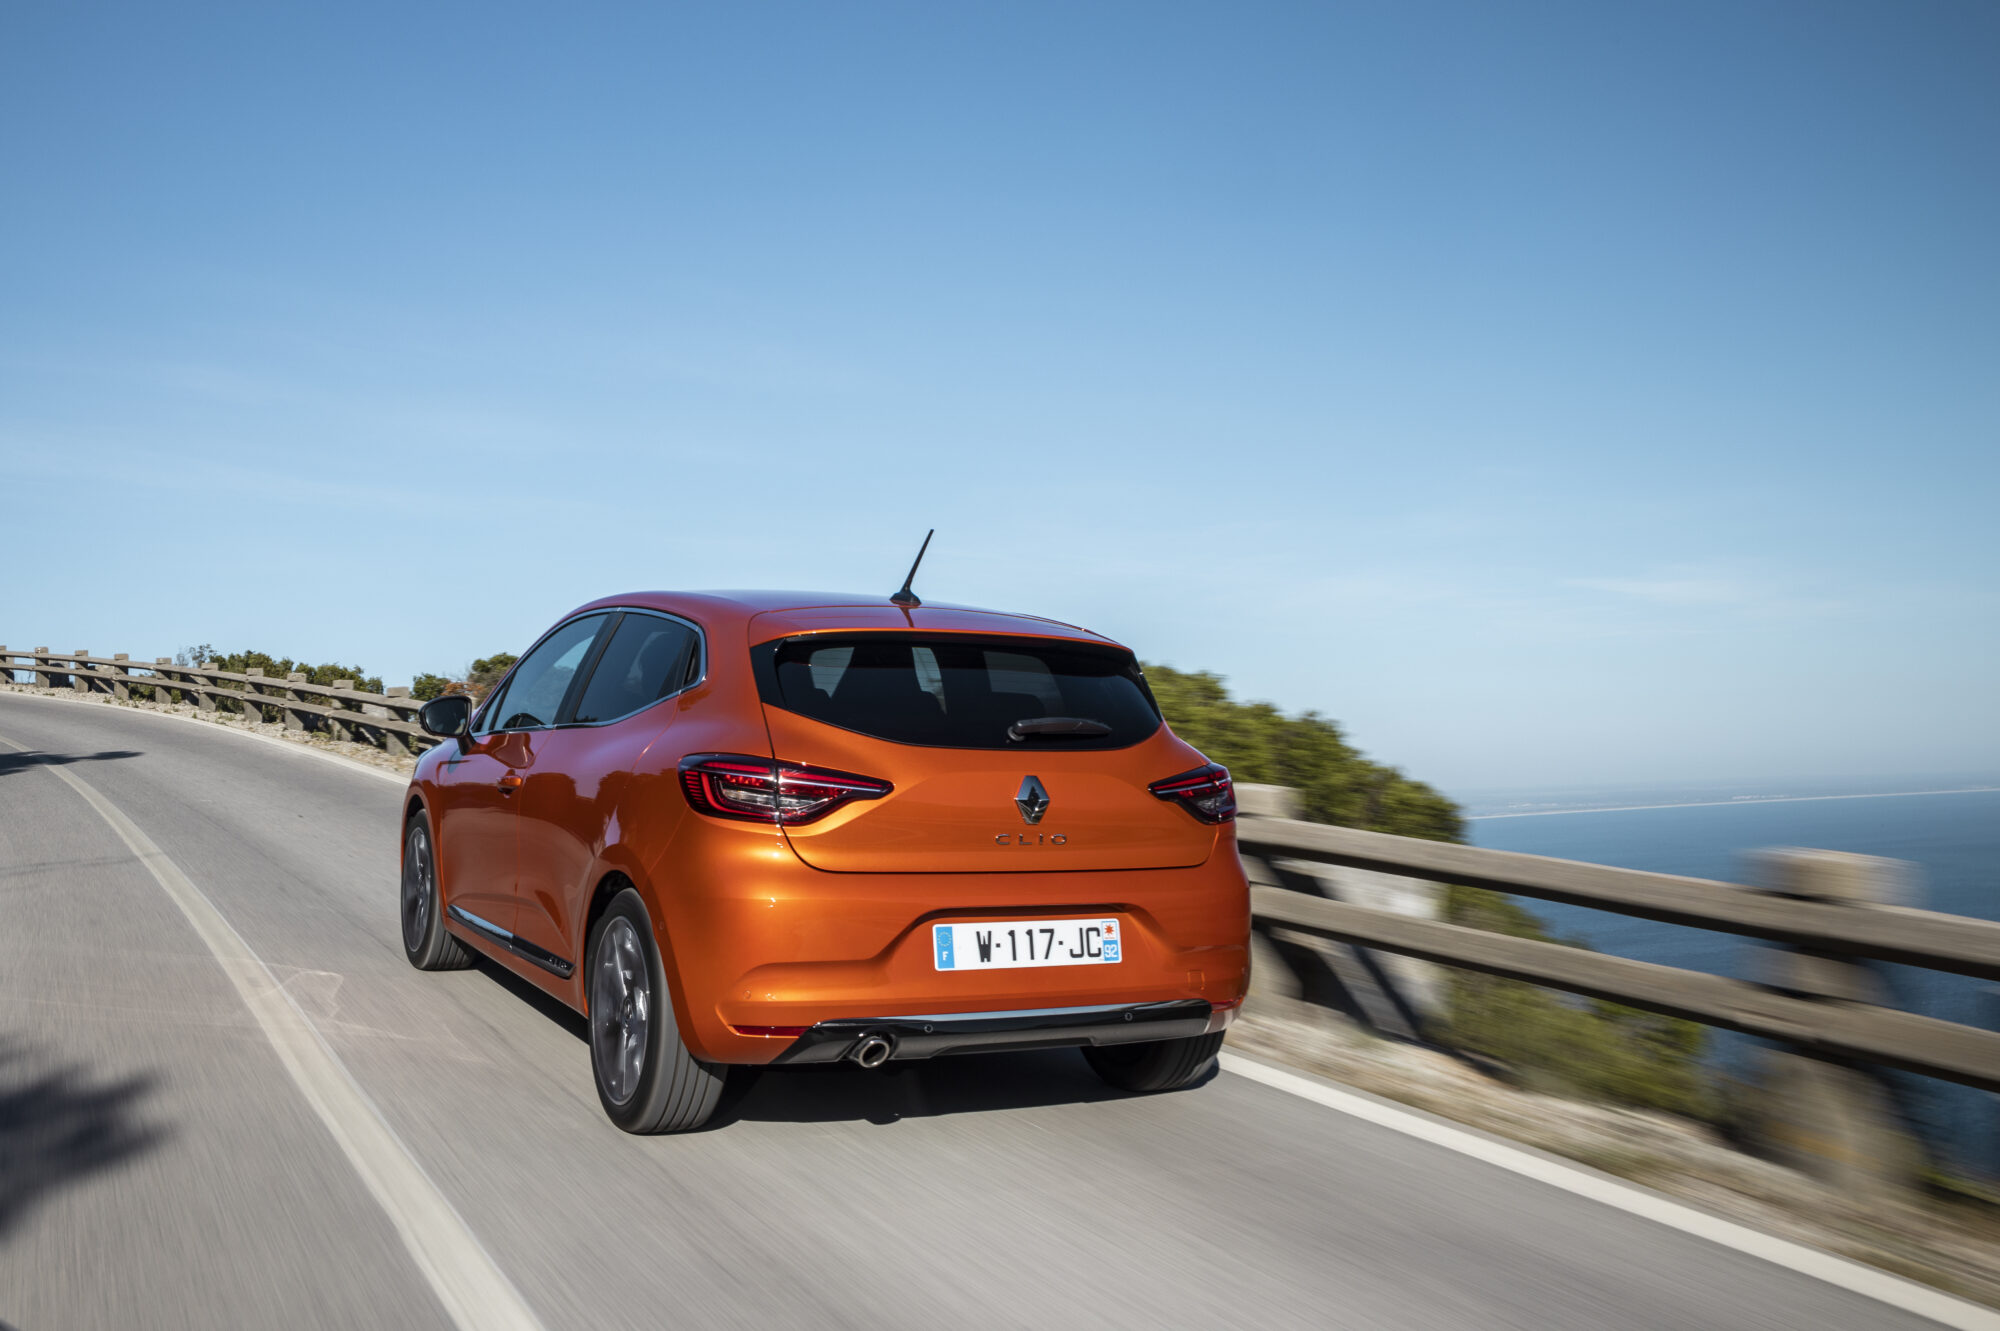 2019 - New Renault CLIO test drive in Portugal